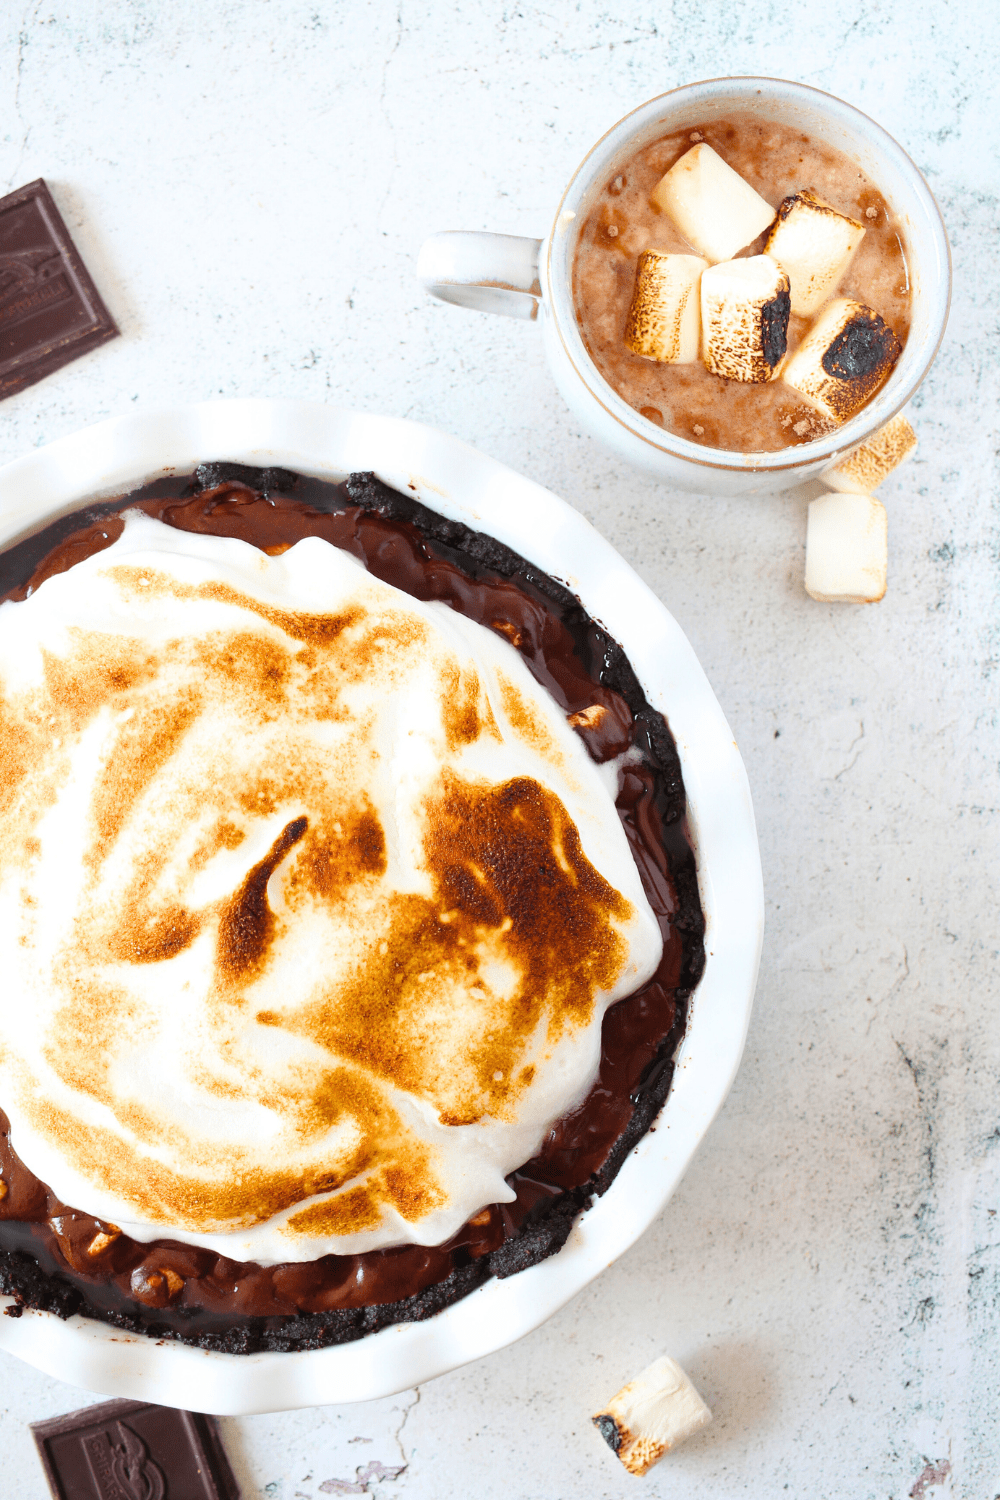 top view of a keto chocolate pie with sugar-free marshmallow frosting, and a cup of hot cocoa with chunks of chocolate scattered around the keto chocolate pie.